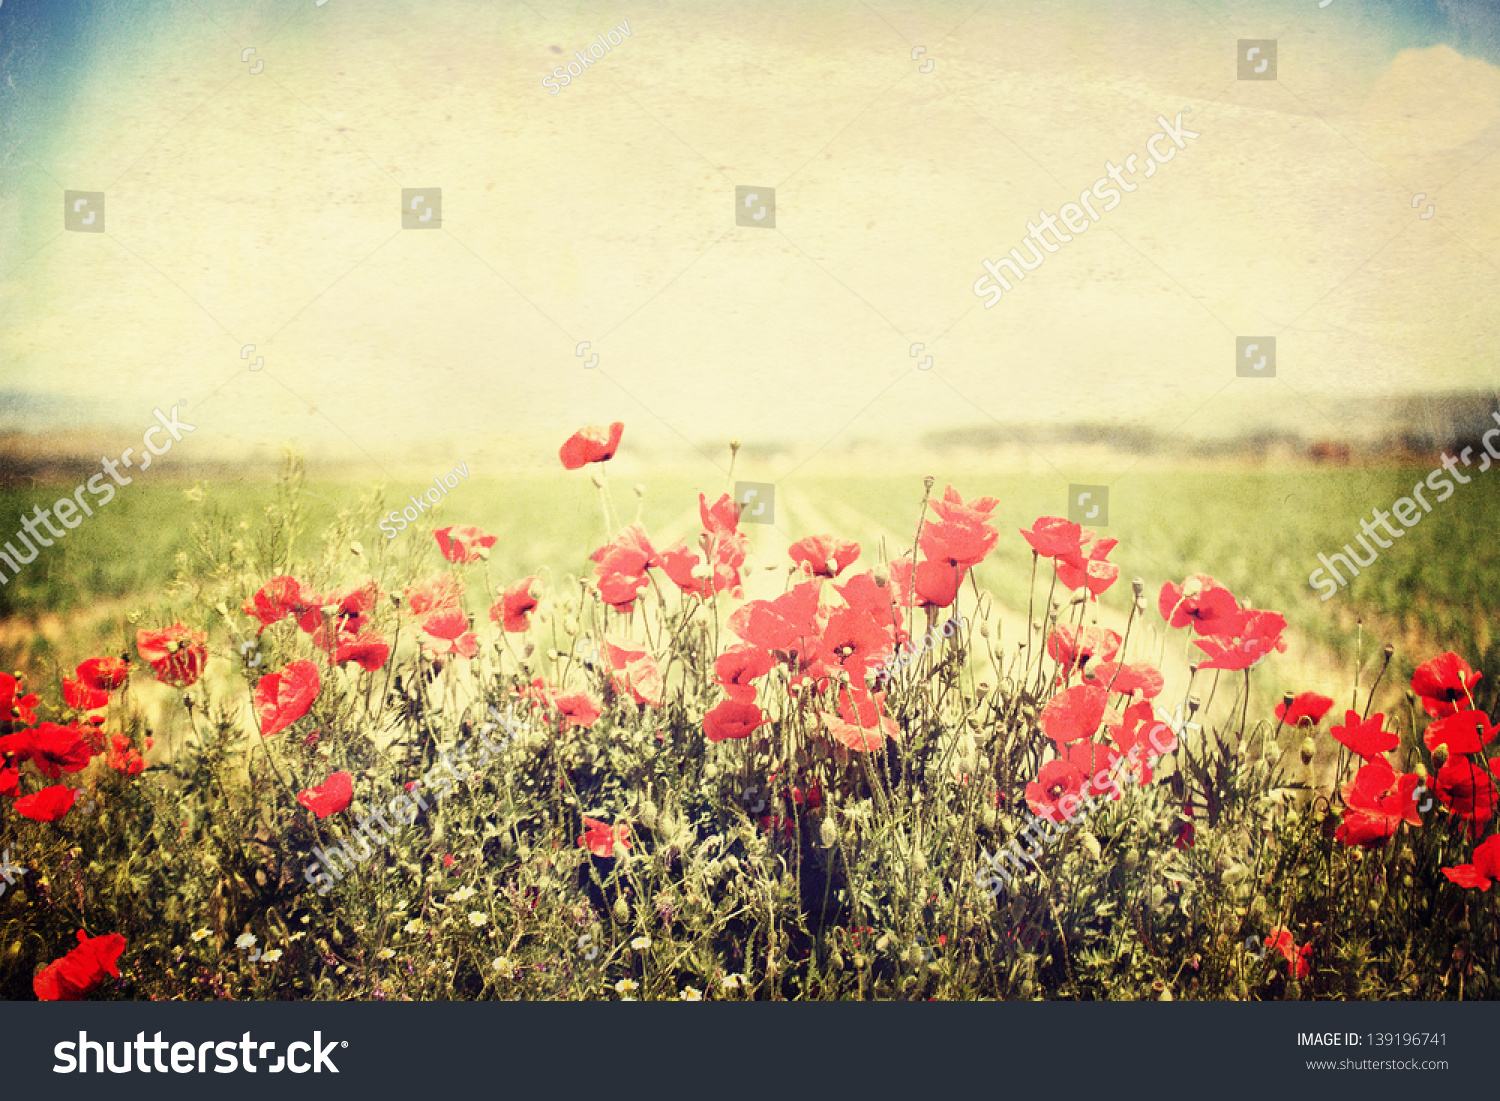 panoramic vintage landscape with red flower in spring field #139196741